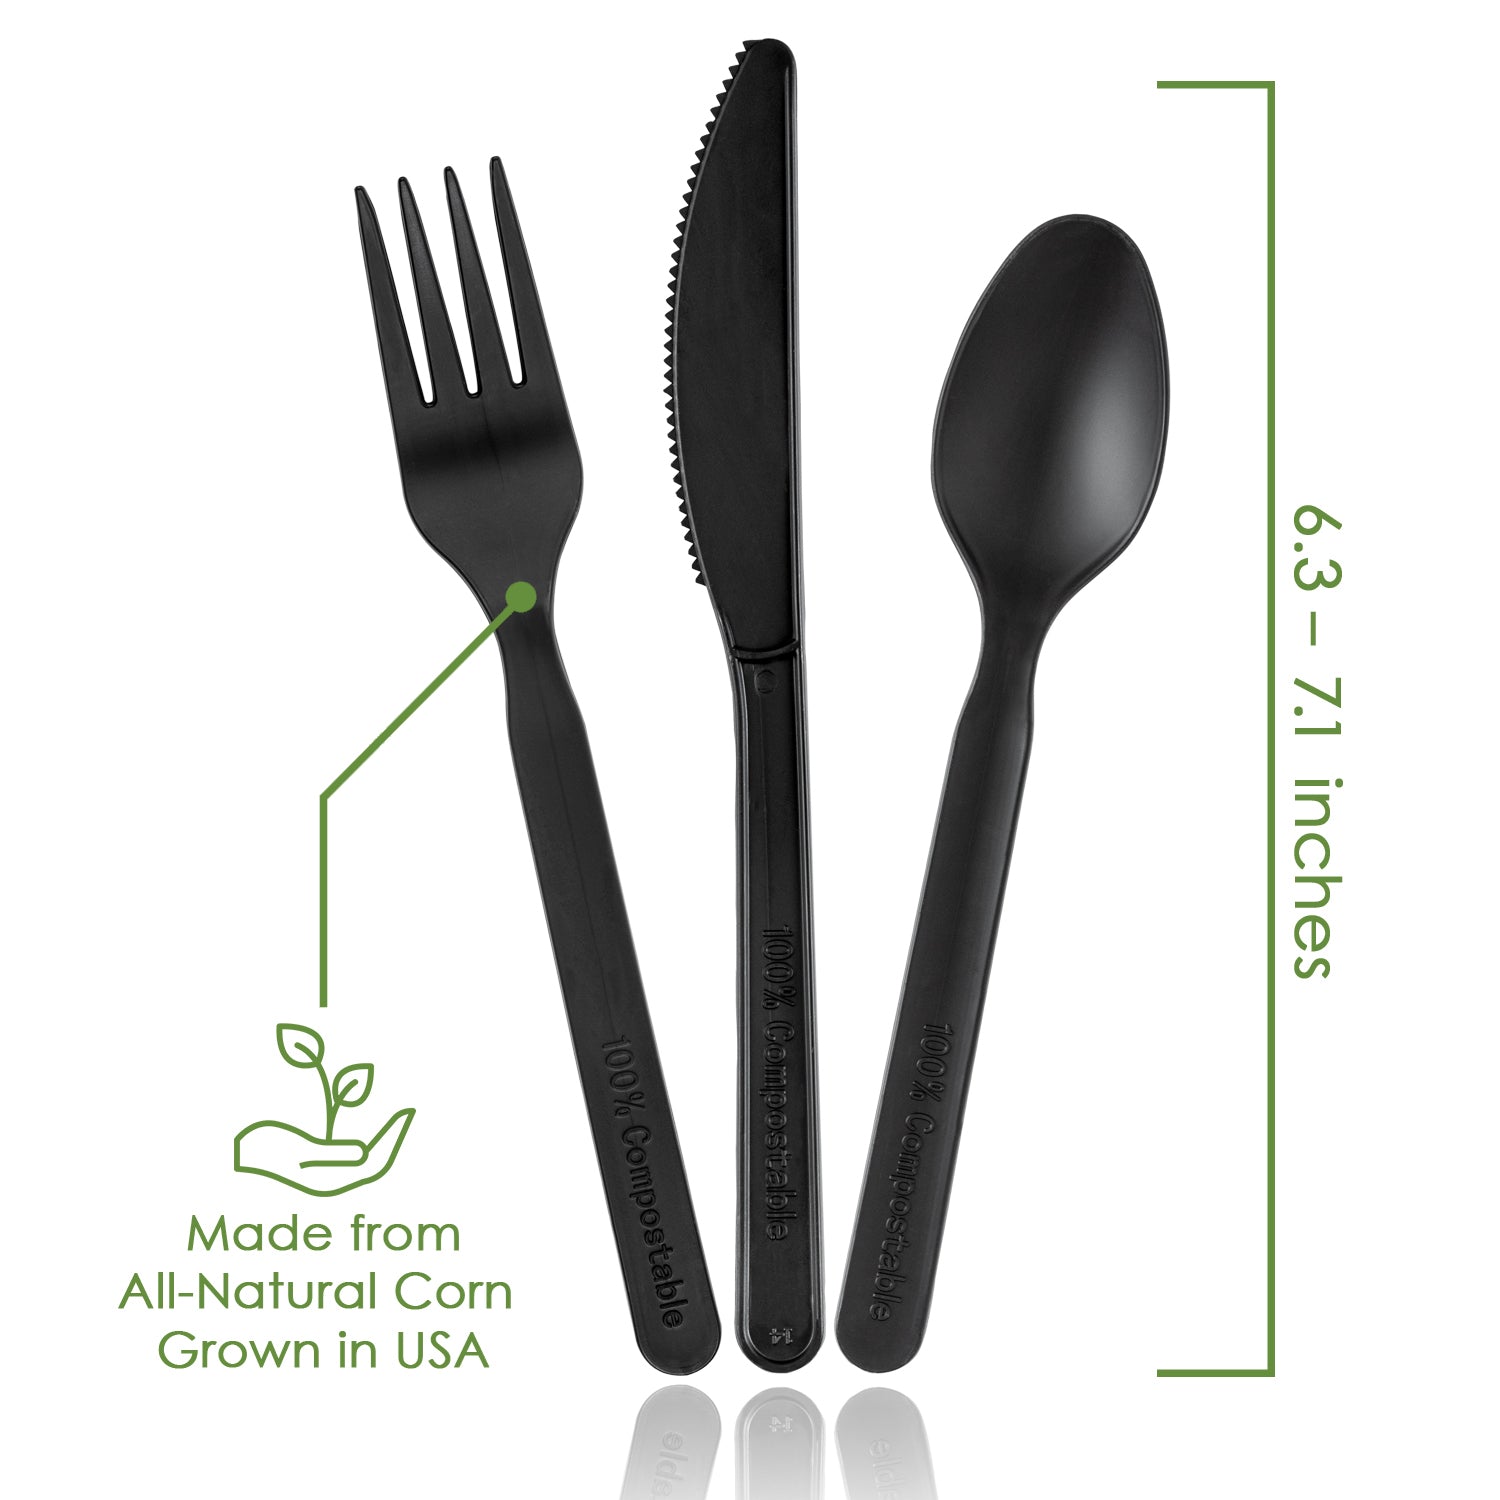 100% Compostable Forks Spoons and Knives - 380 Piece Eco Cutlery Combo Set - Eco Friendly Alternative to Plastic Silverware